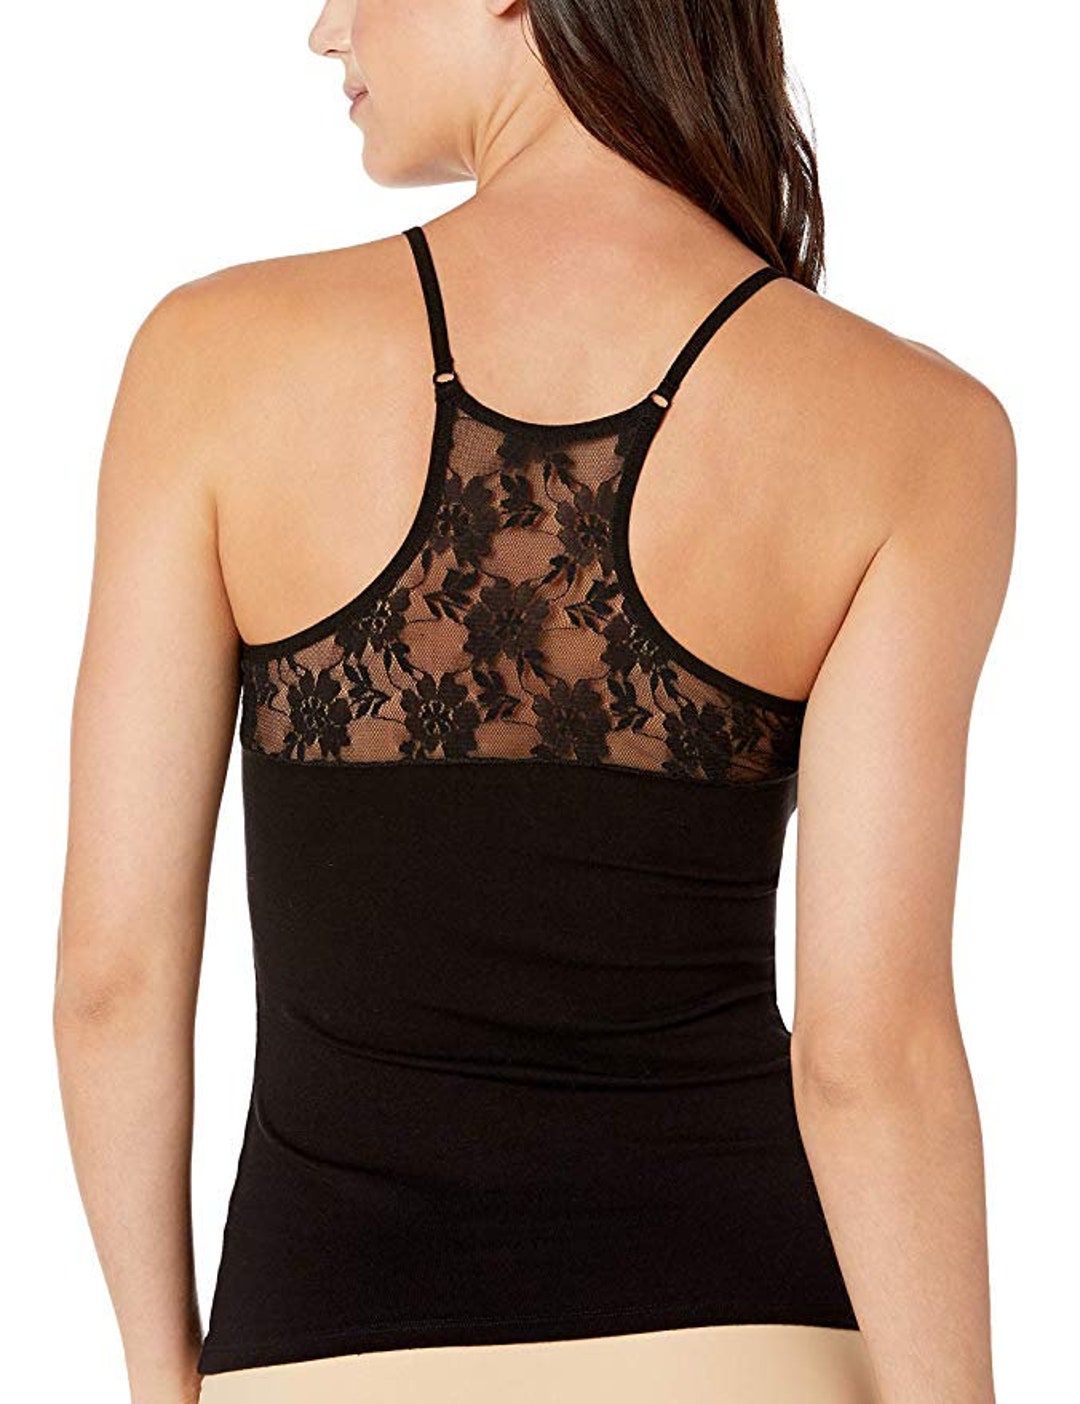 Women's Dressy Cami Tank Tops Fashion Lace Camisole, Comfy Durable Soft Stretch  Cotton Lace Trim Camisole Tank Tops Best Gift Chrismas Gift 